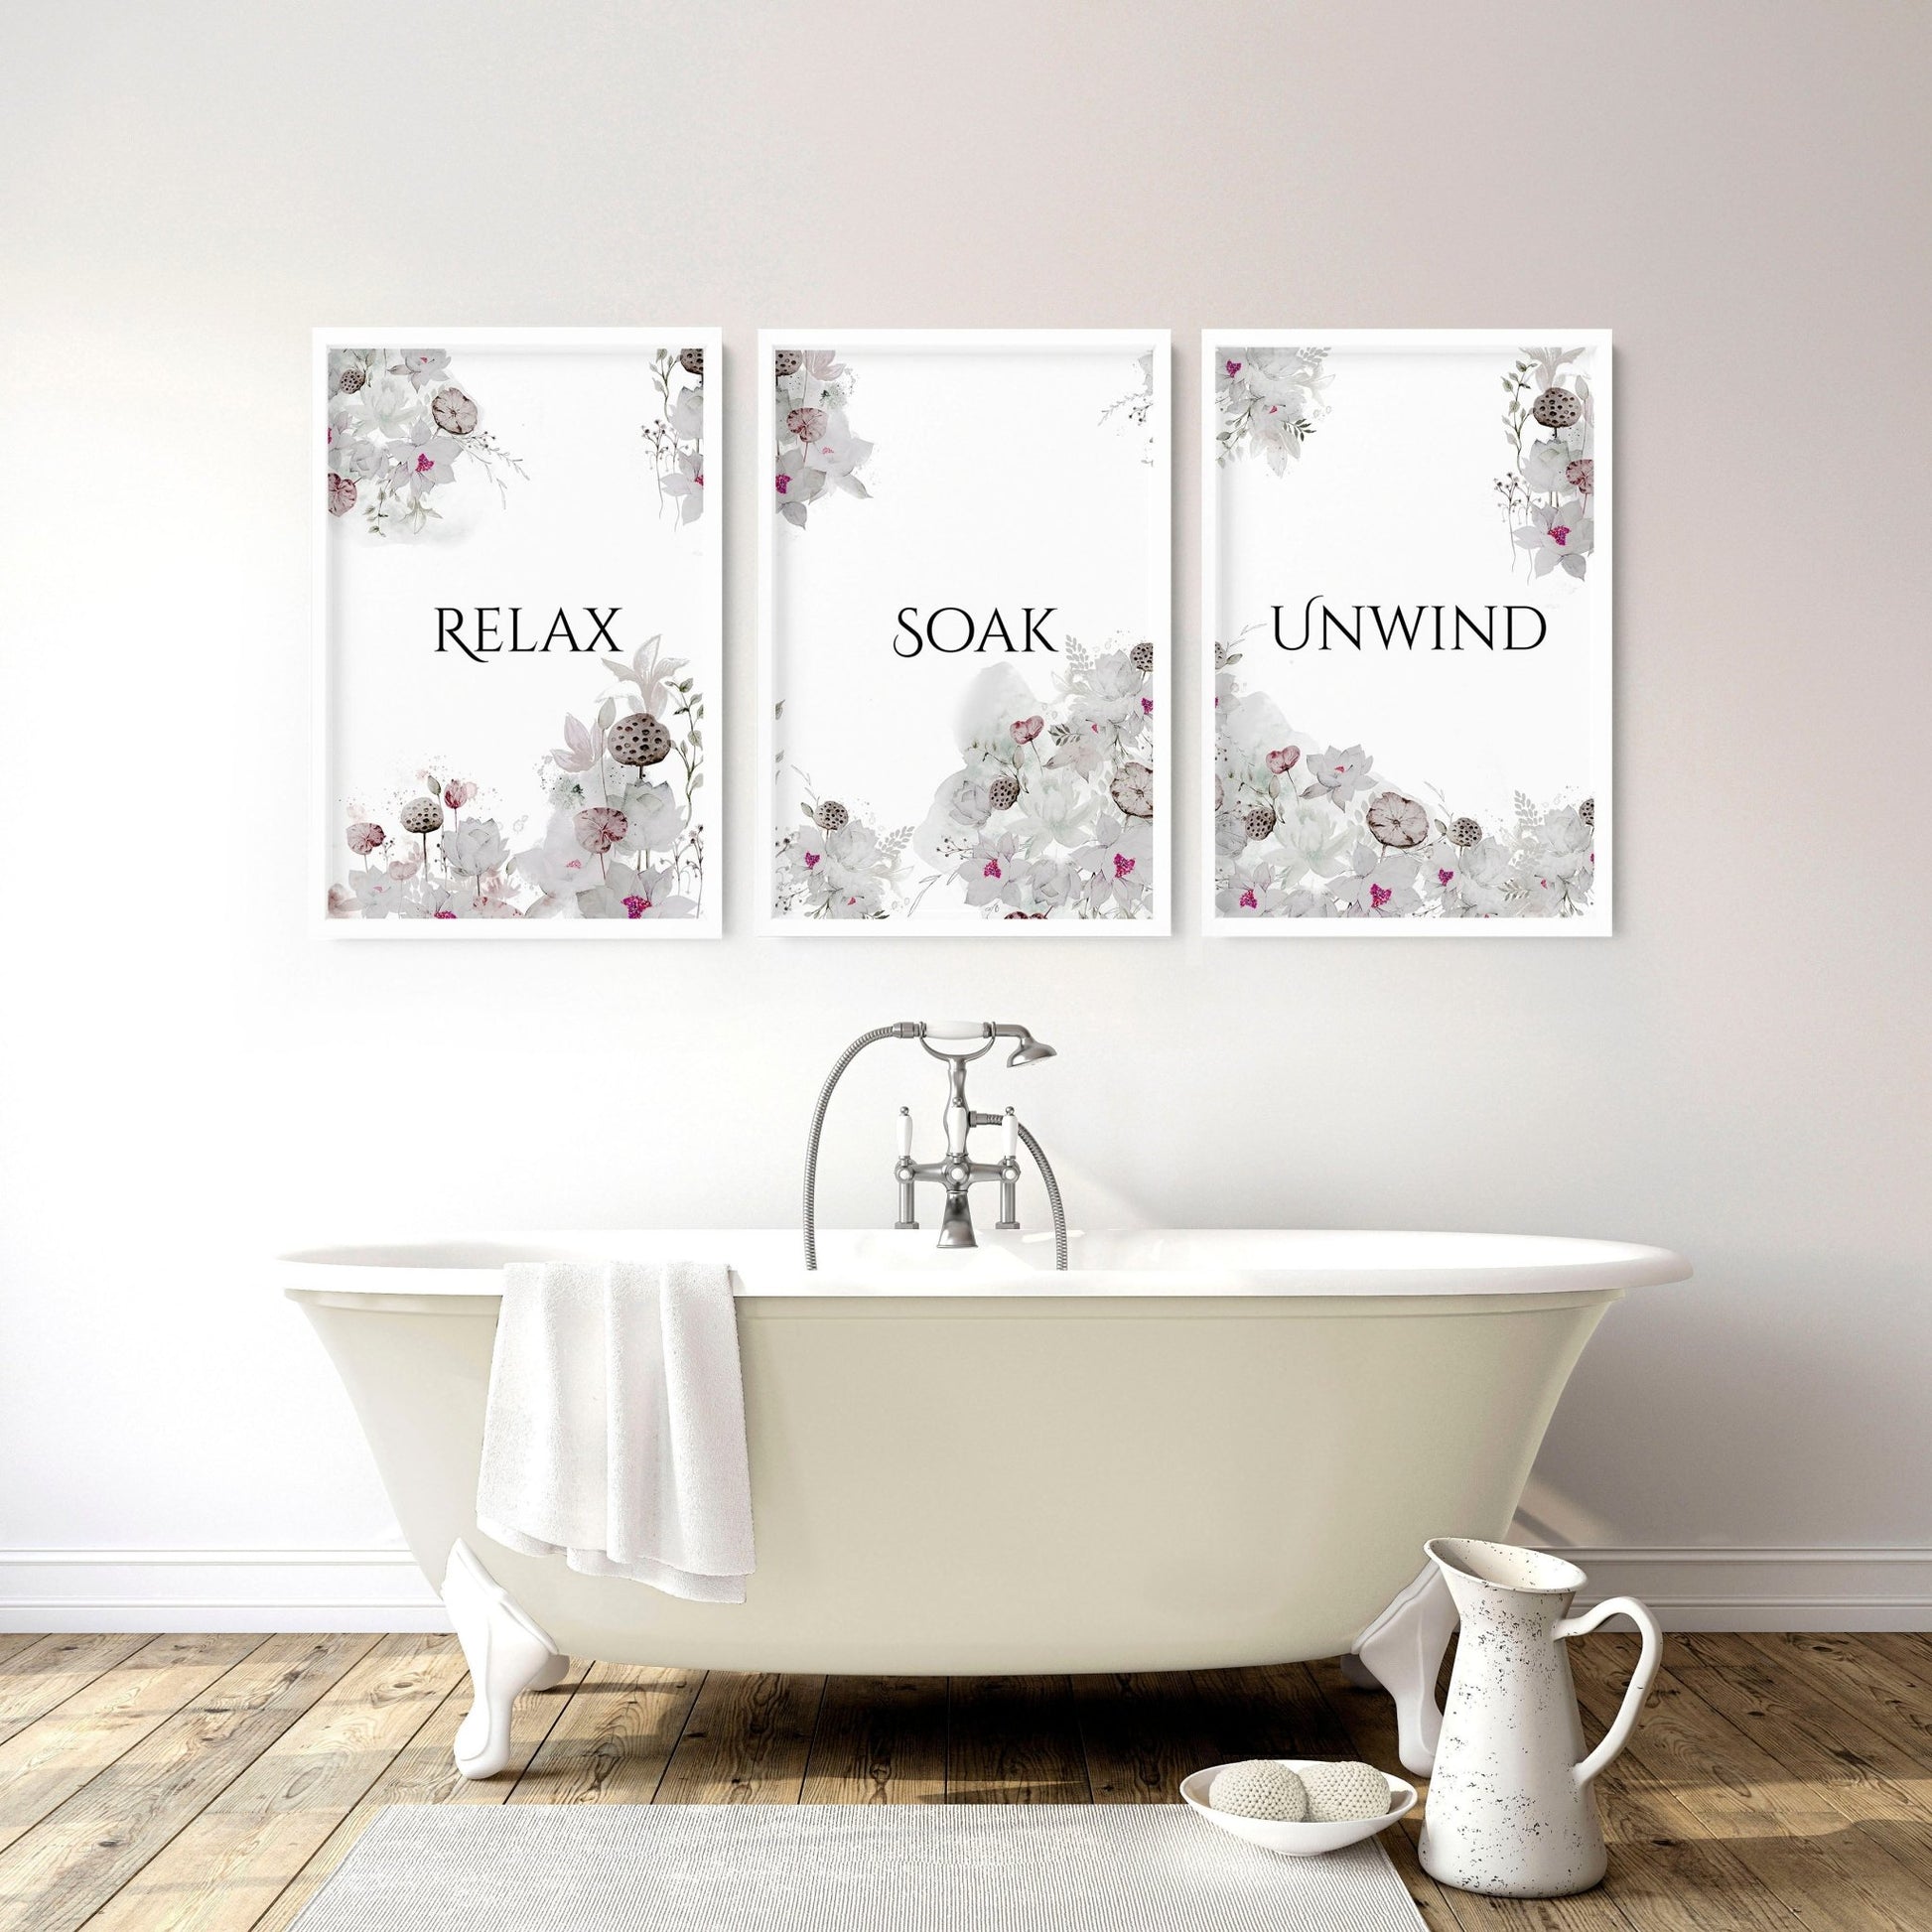 Country bathroom wall decor | Set of 3 wall art prints - About Wall Art